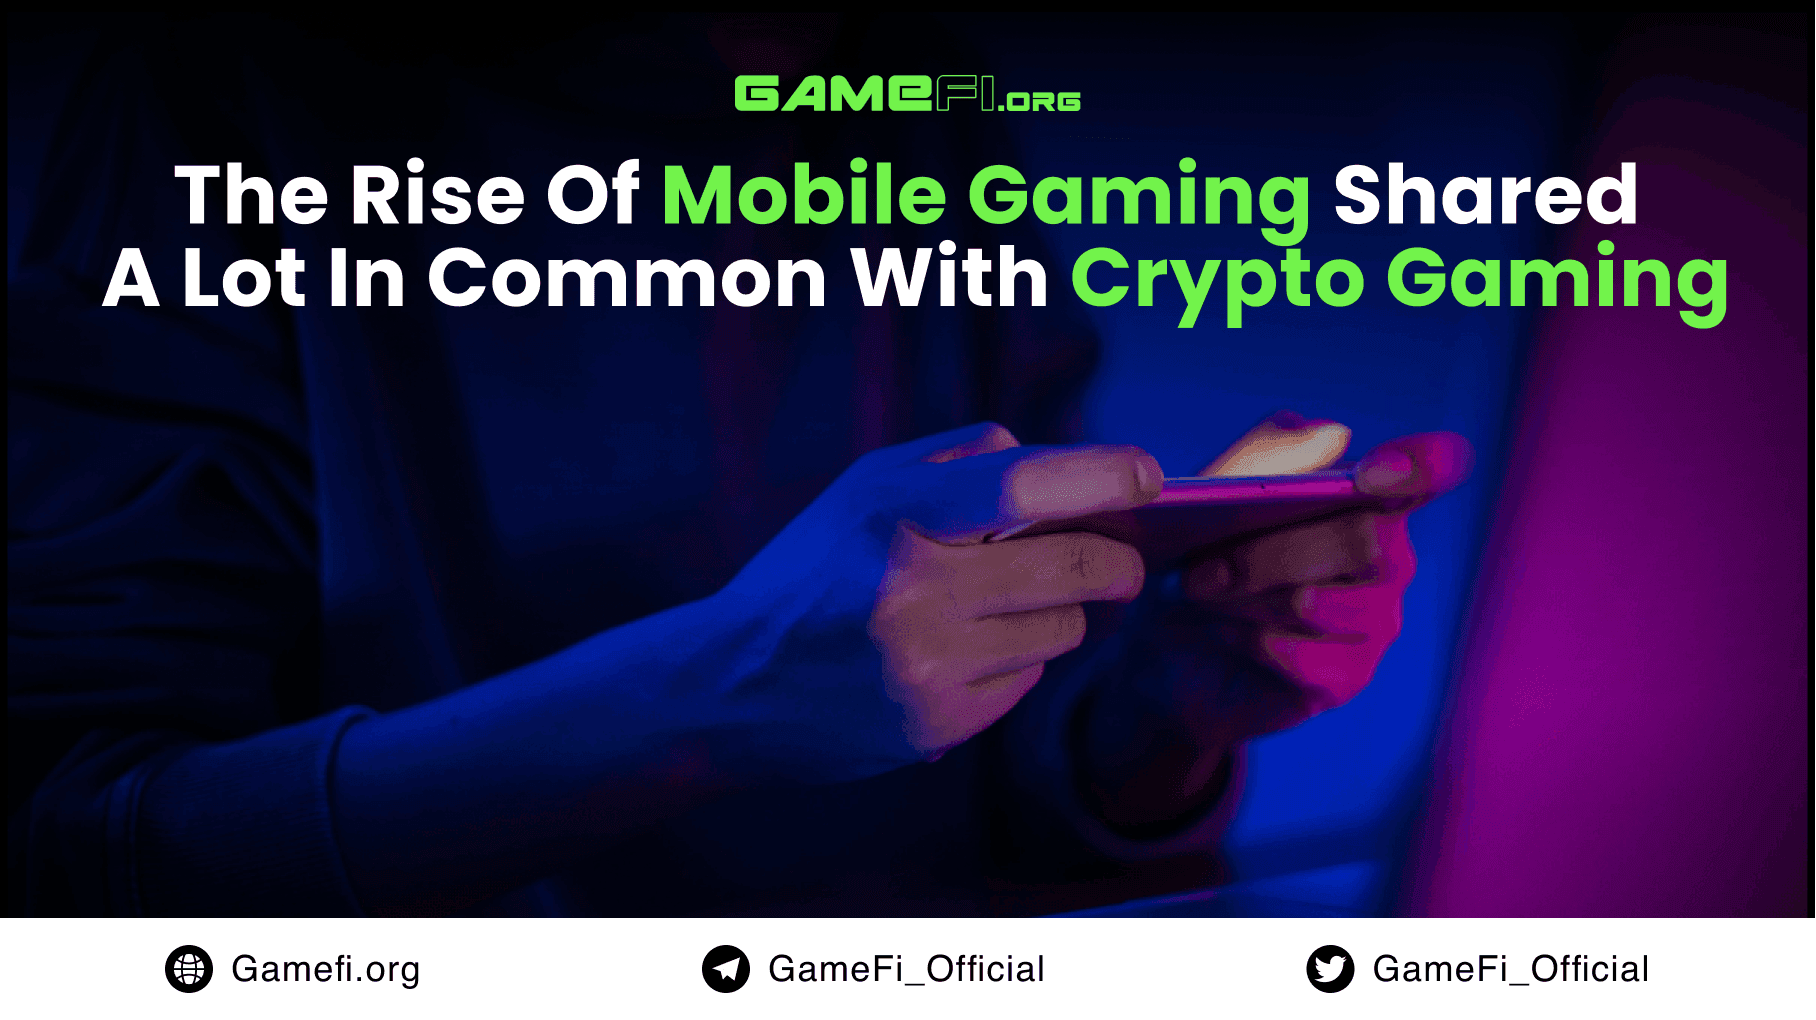 The Rise Of Mobile Gaming Shared A Lot In Common With Crypto Gaming